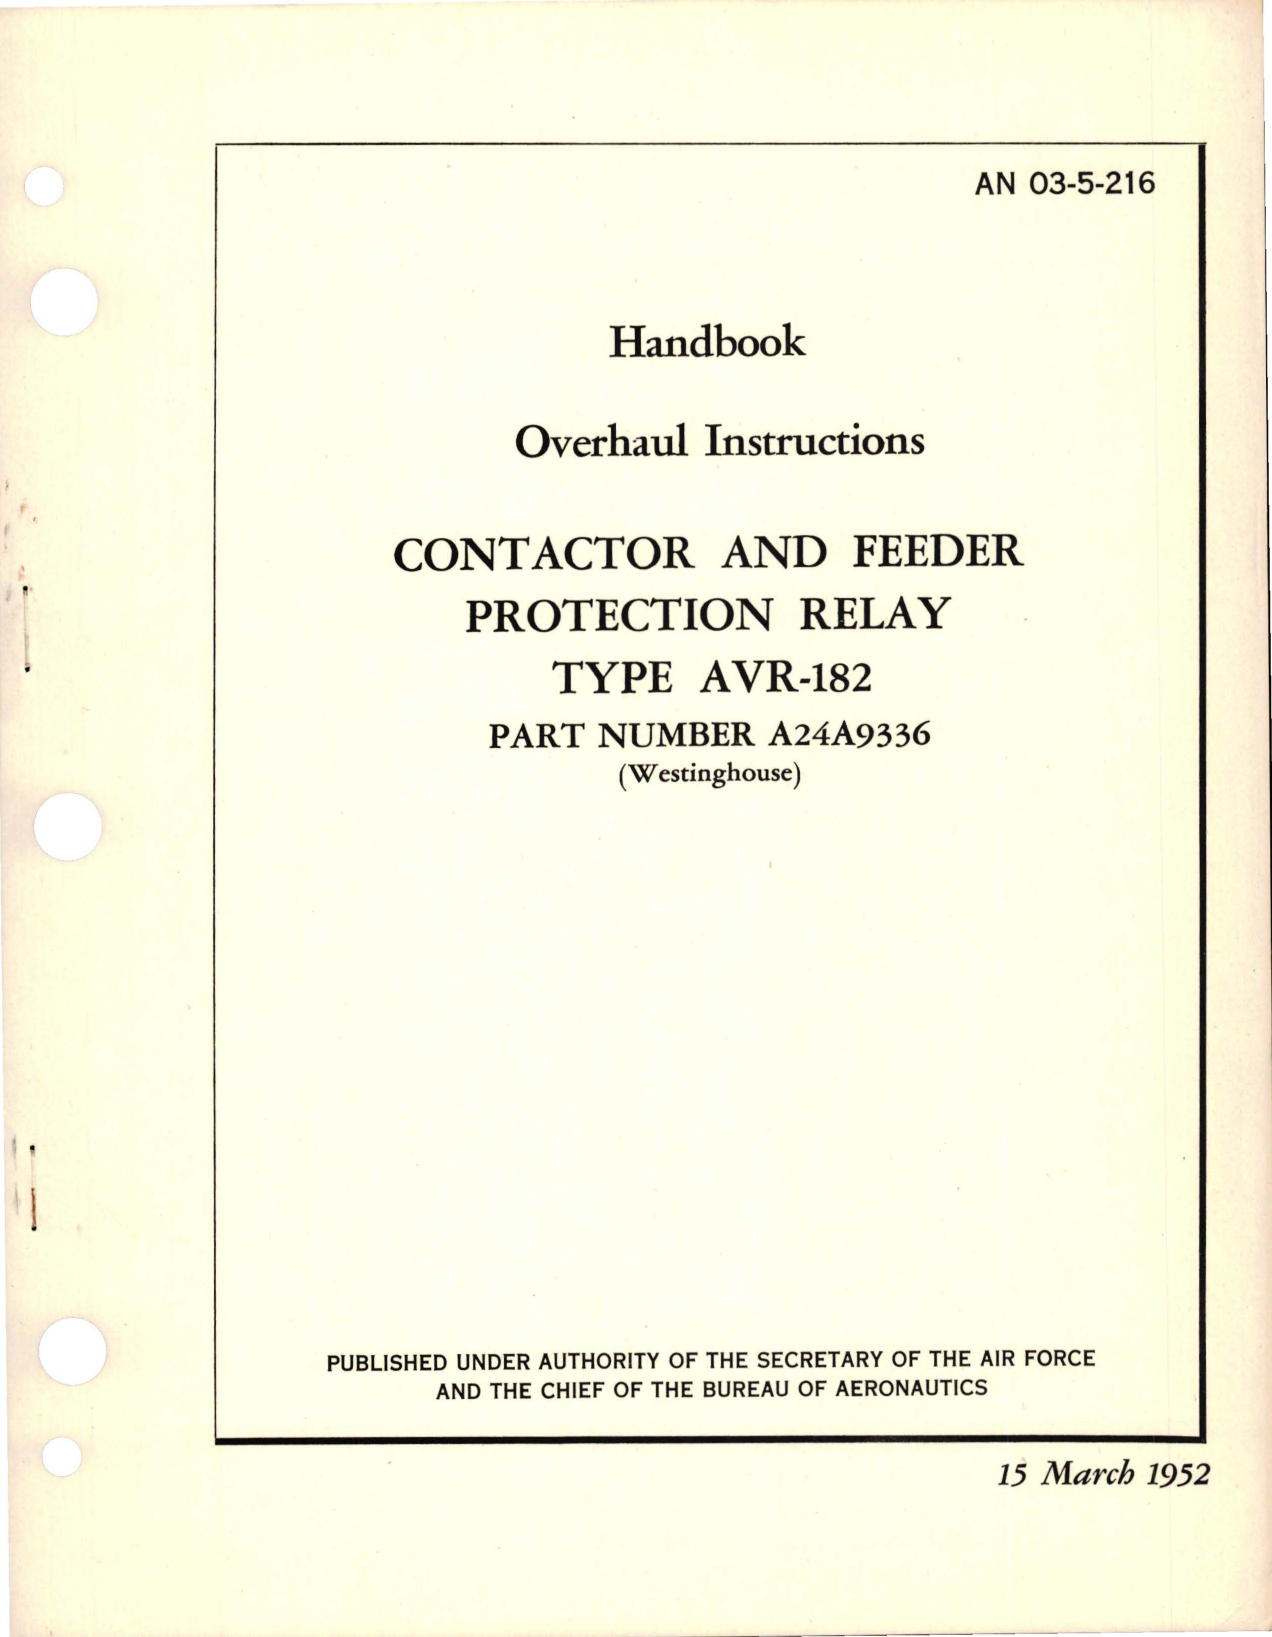 Sample page 1 from AirCorps Library document: Overhaul Instructions for Contactor and Feeder Protection Relay - Type AVR-182 - Part A24A9336